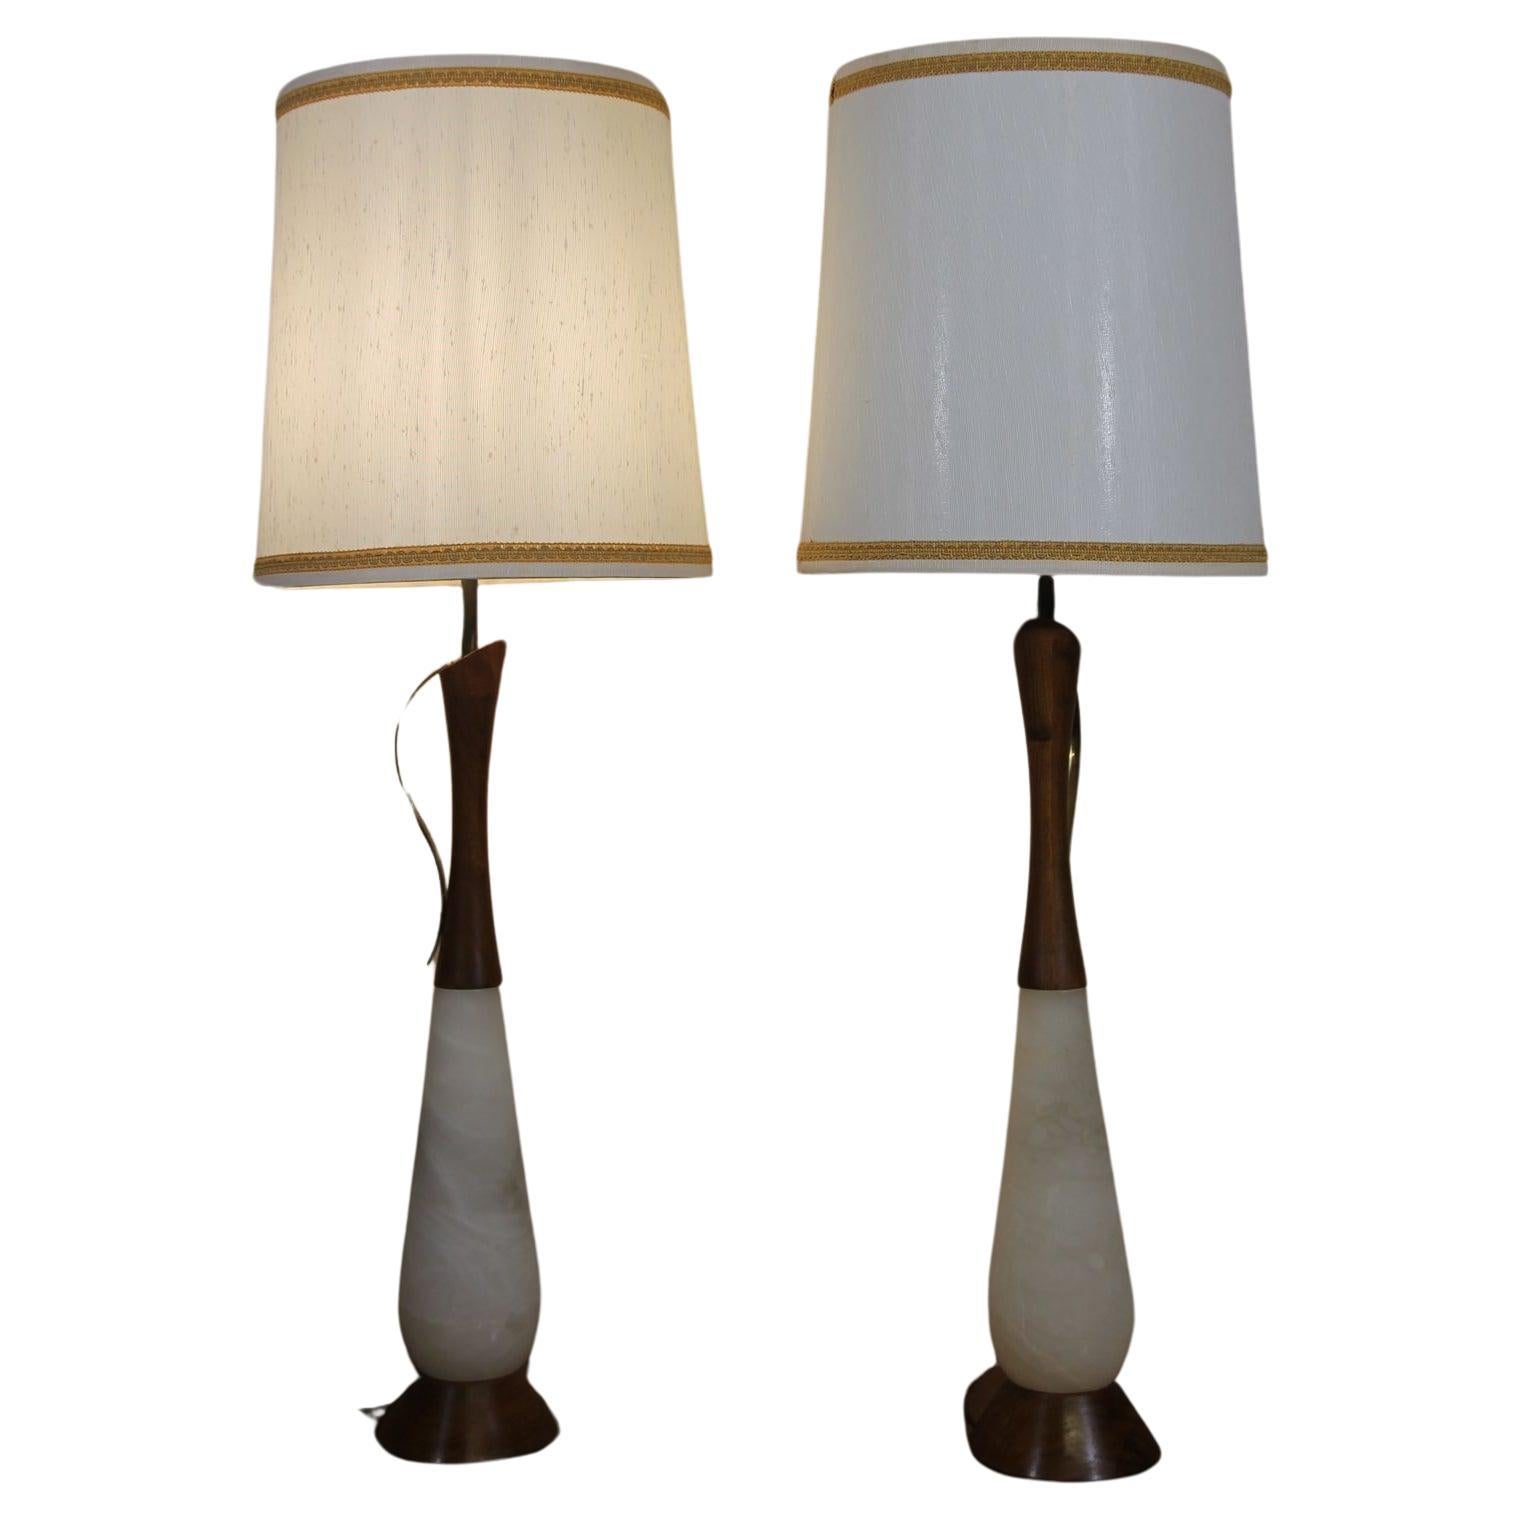 Italian Alabaster Lamps With Original Shades and Finials